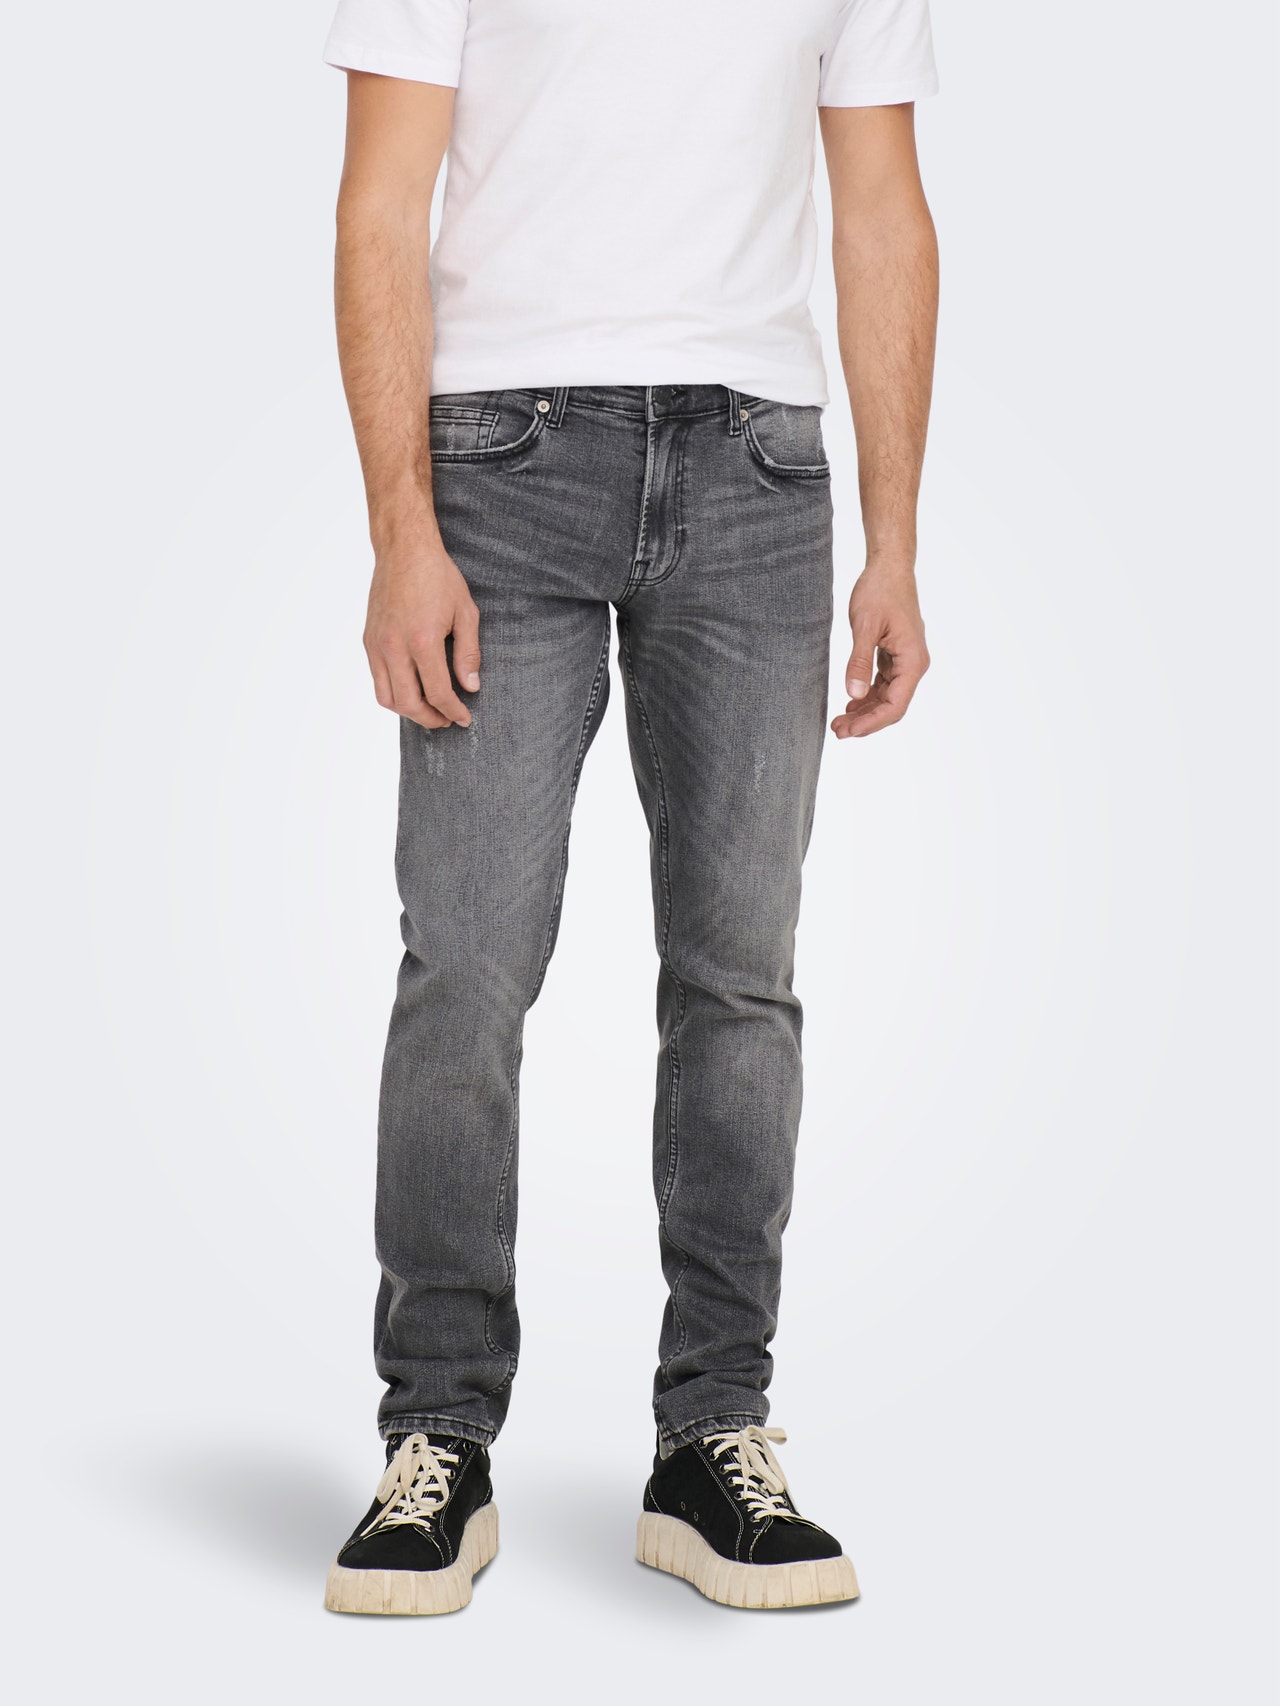 ONSWEFT REG GREY DESTROY 4287 JEANS with 30% discount!